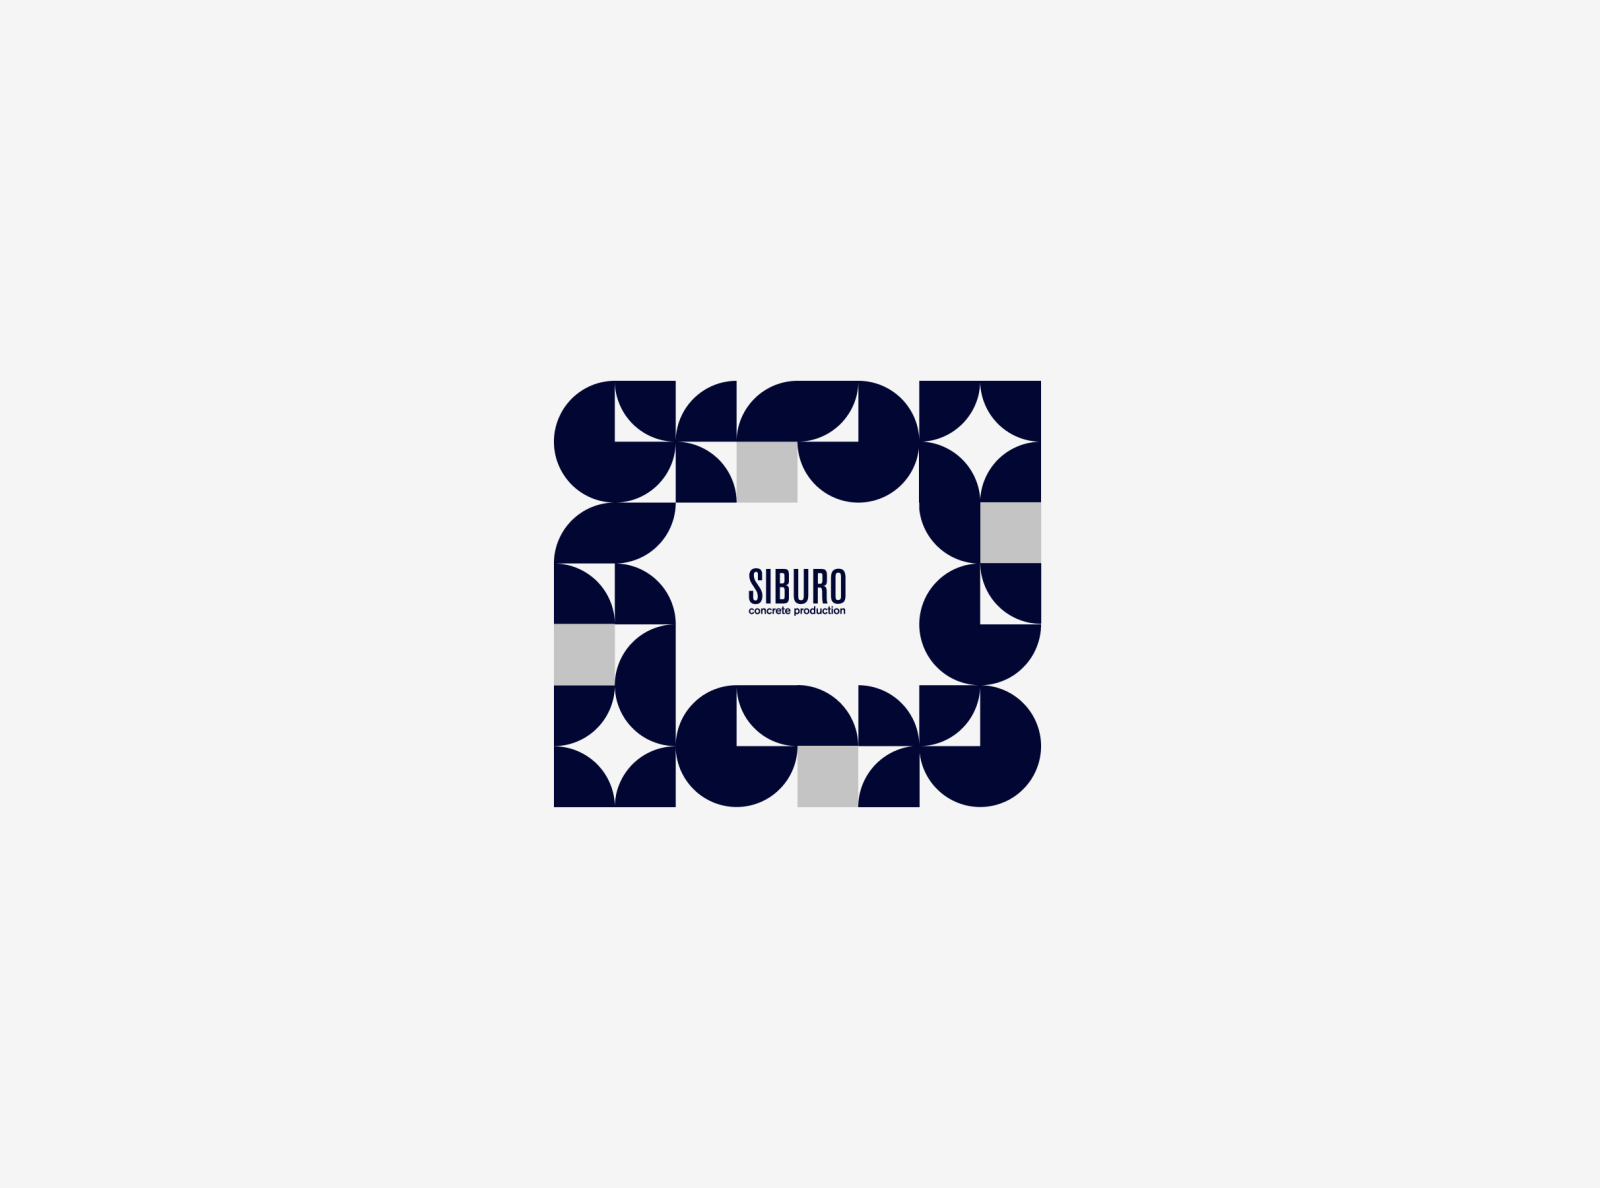 Siburo concrete production company brand identity by Homies on Dribbble